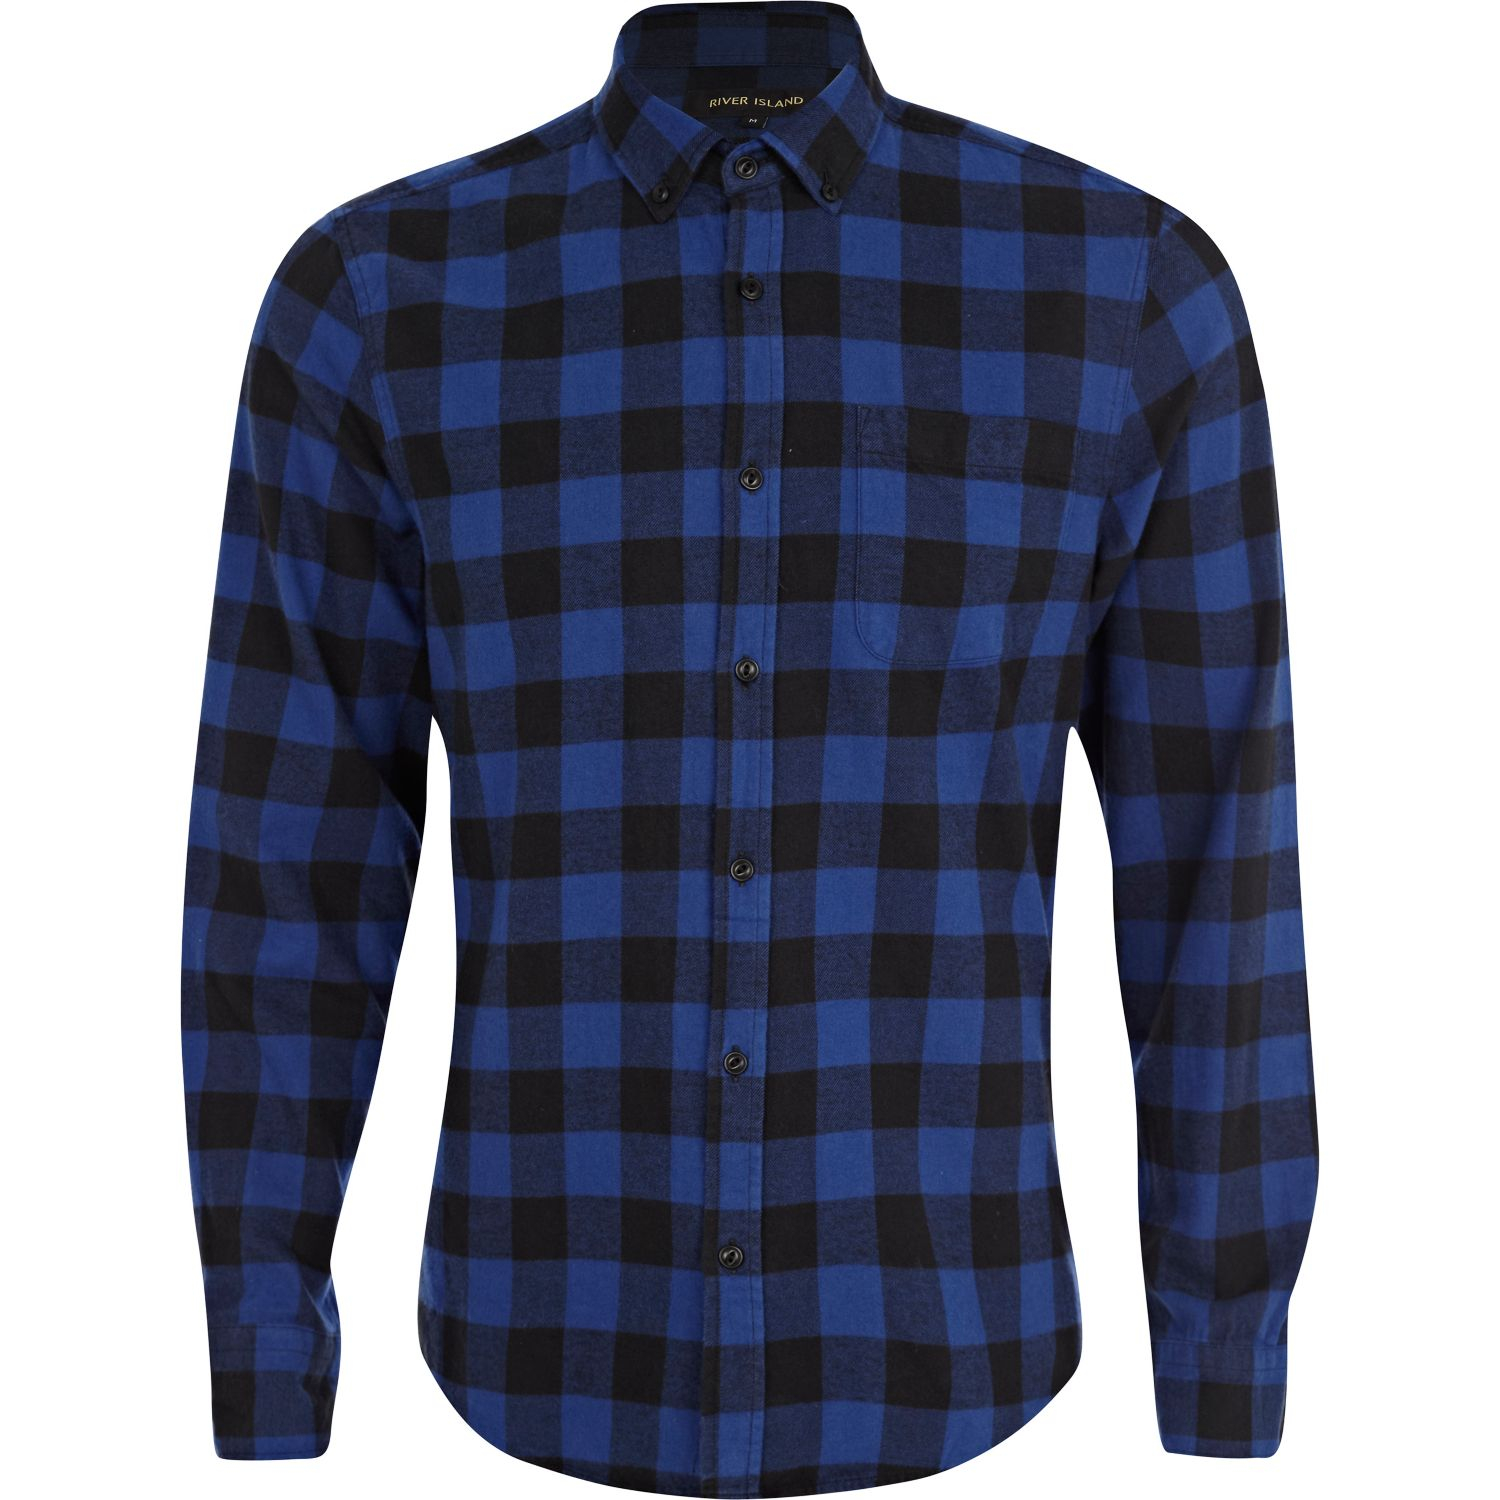 Lyst - River Island Blue Check Flannel Shirt in Black for Men